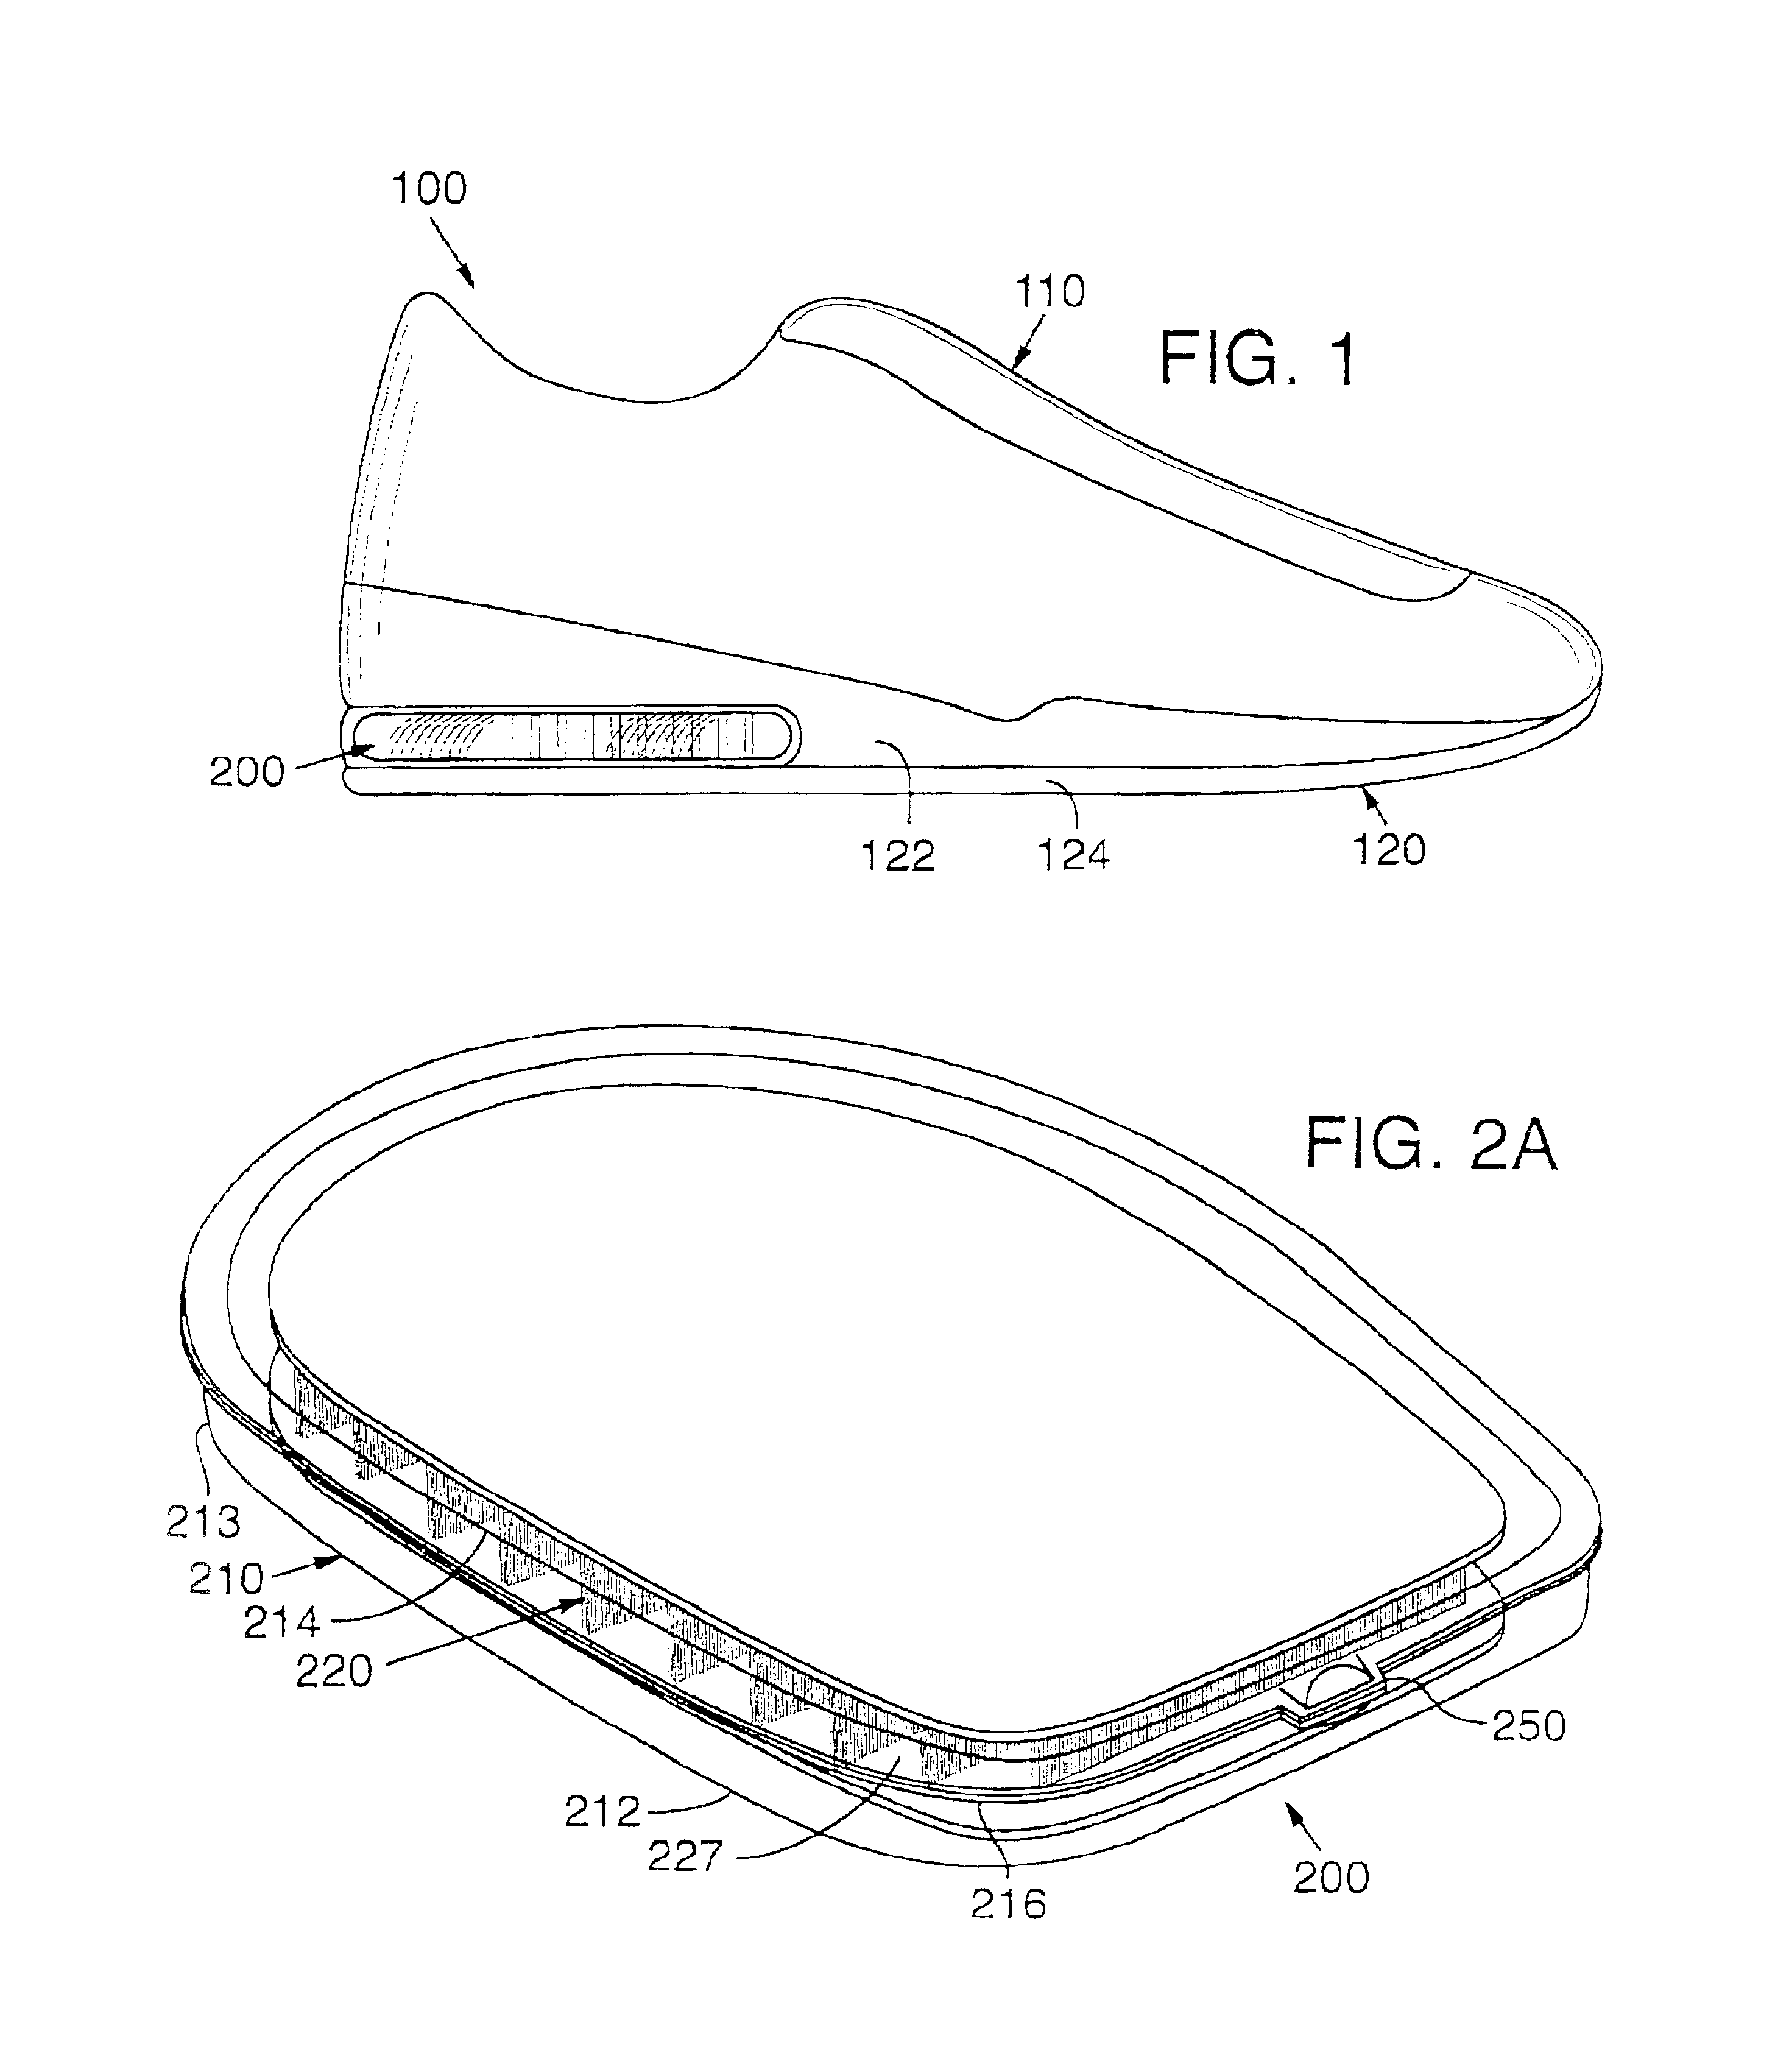 Method of thermoforming a bladder structure